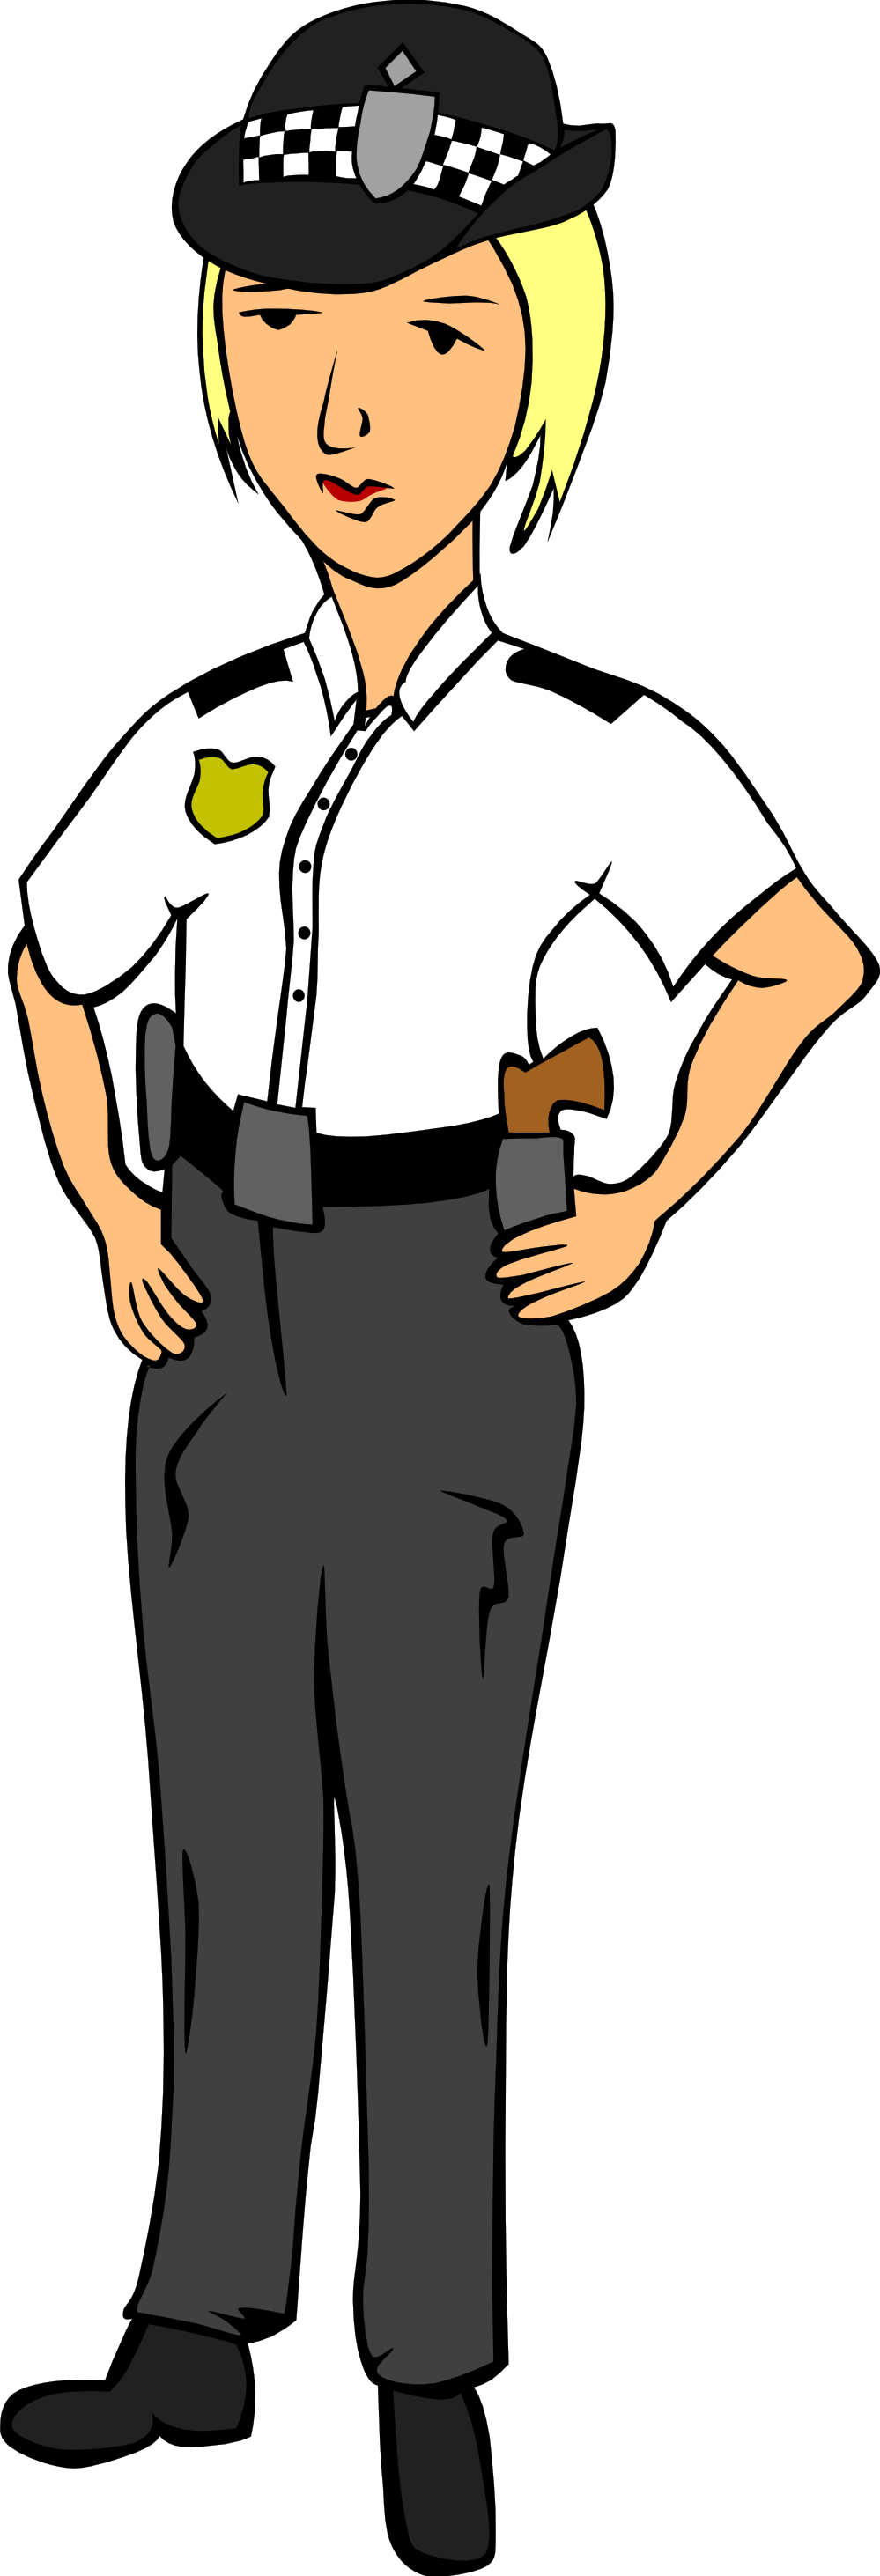 Police Officer Clipart Black And White   Clipart Panda   Free Clipart    